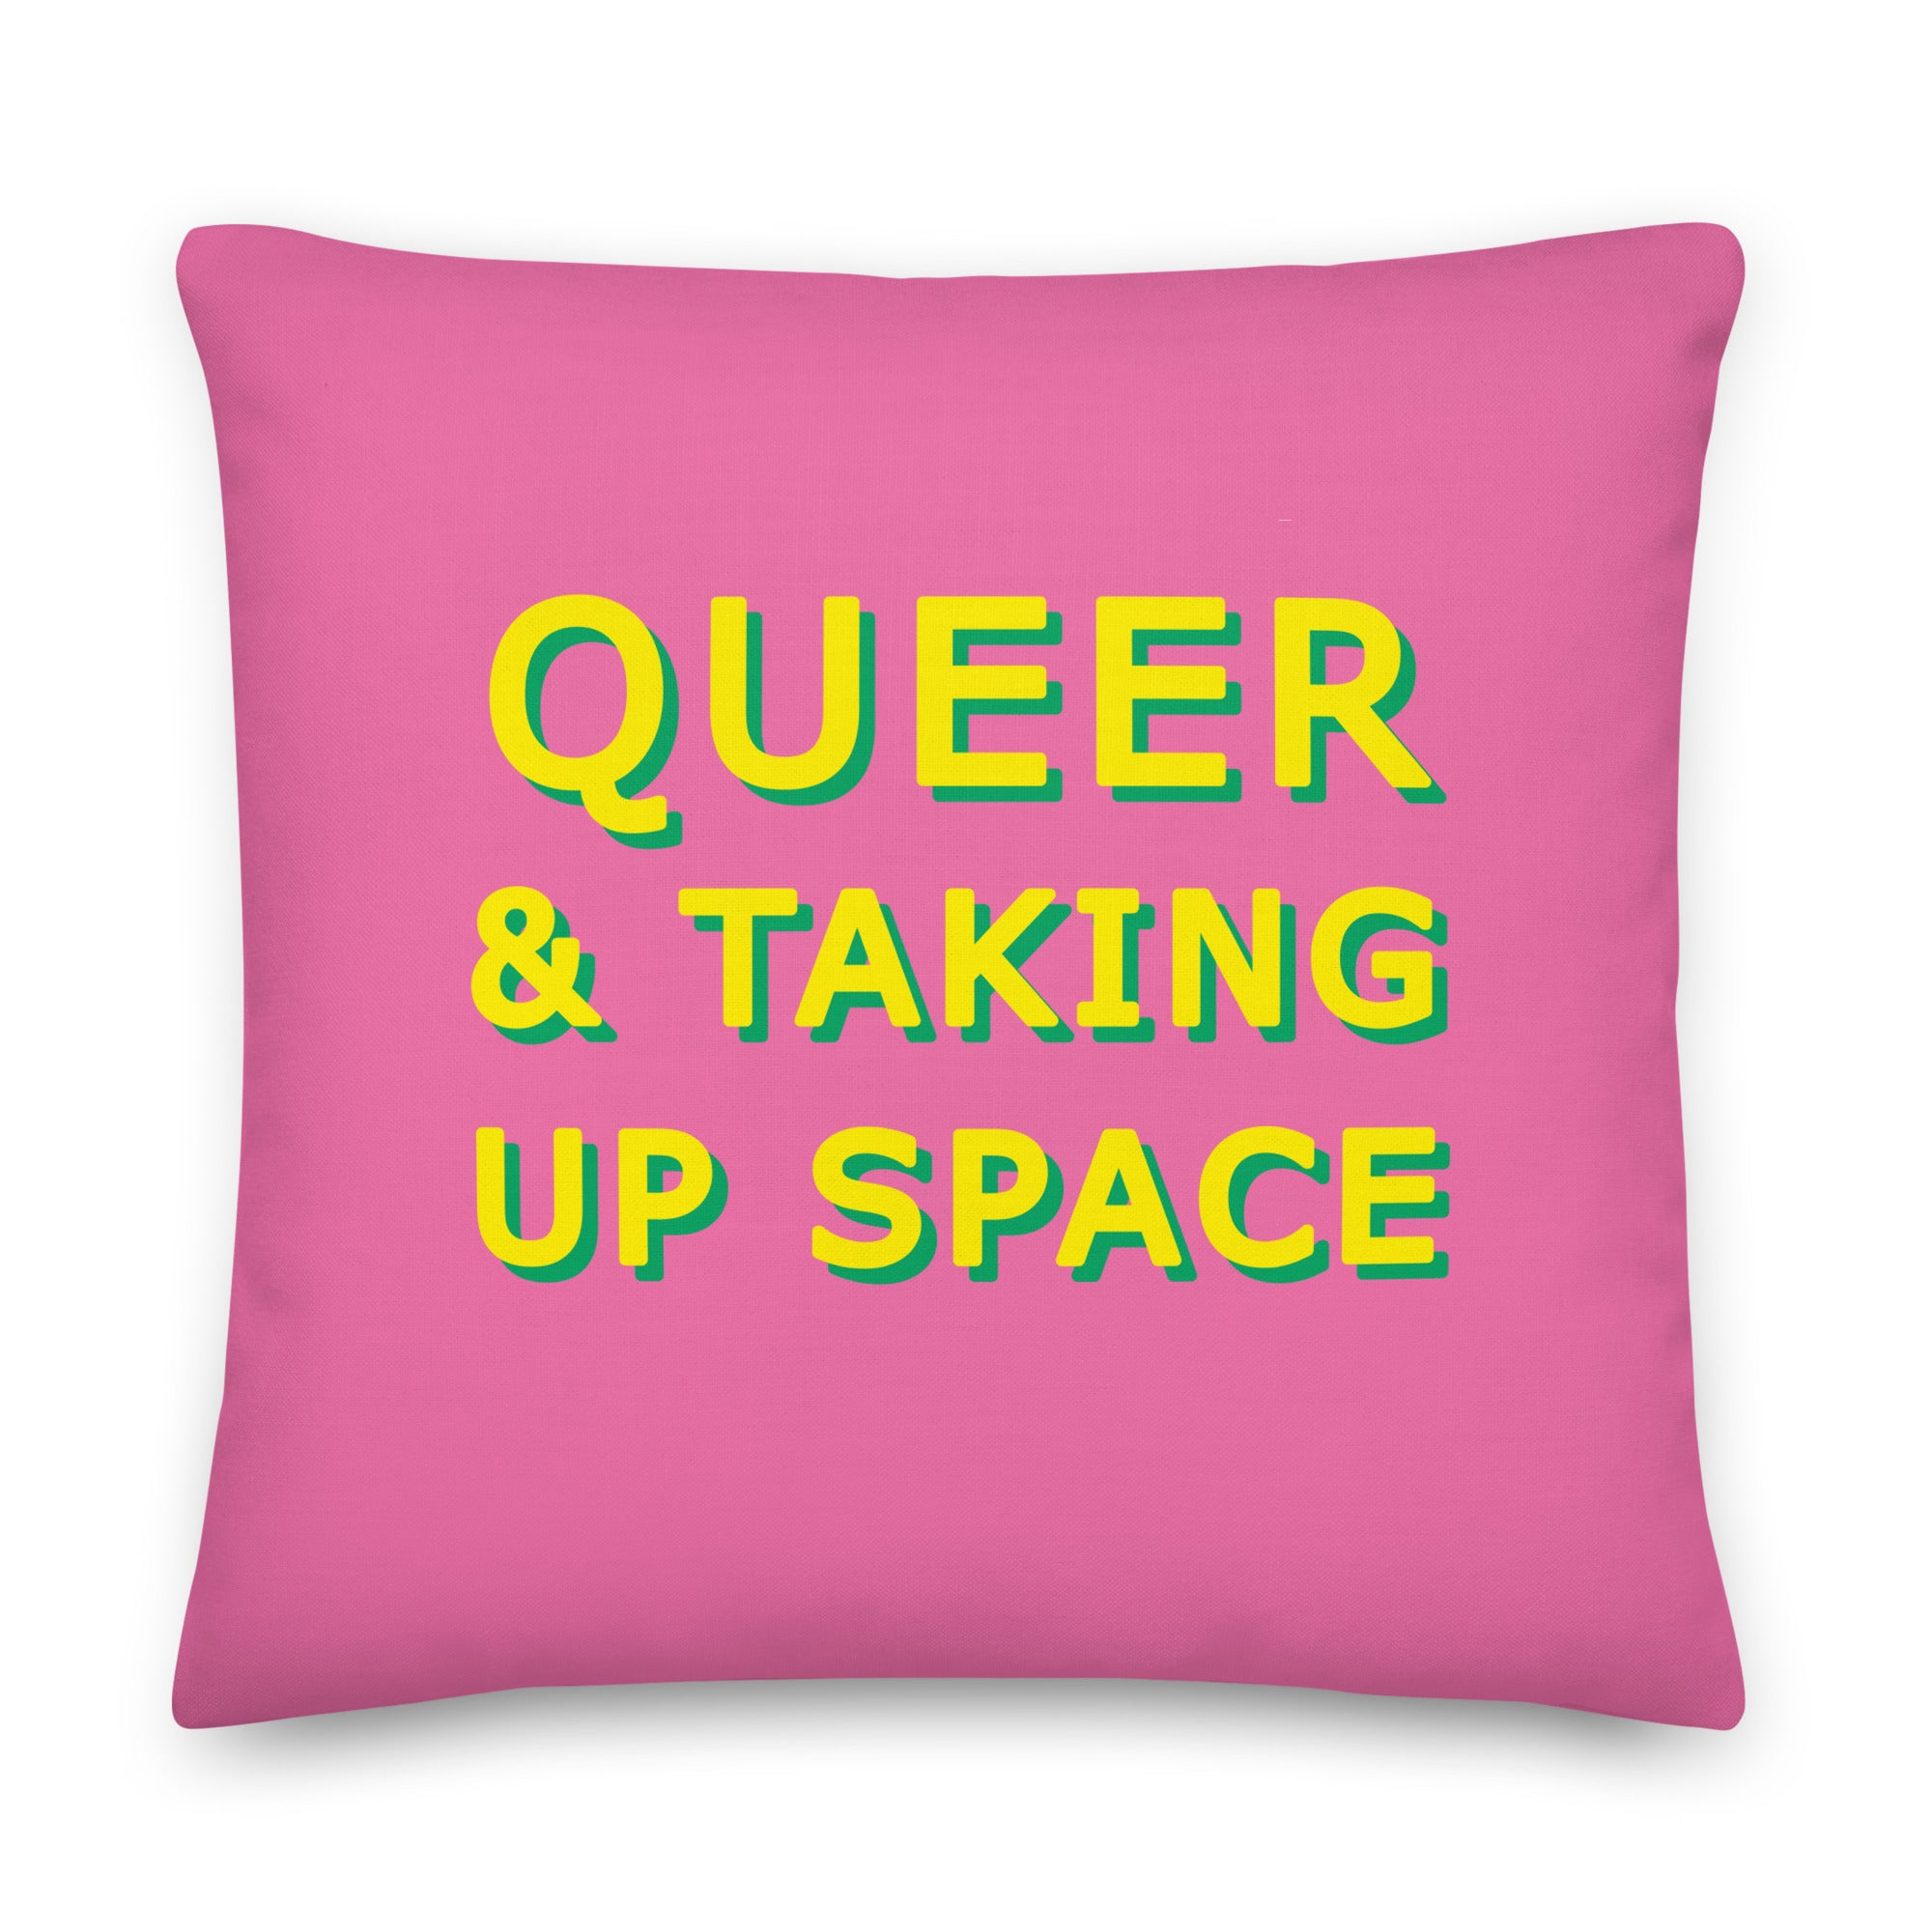 Queer & Taking Up Space Cushions